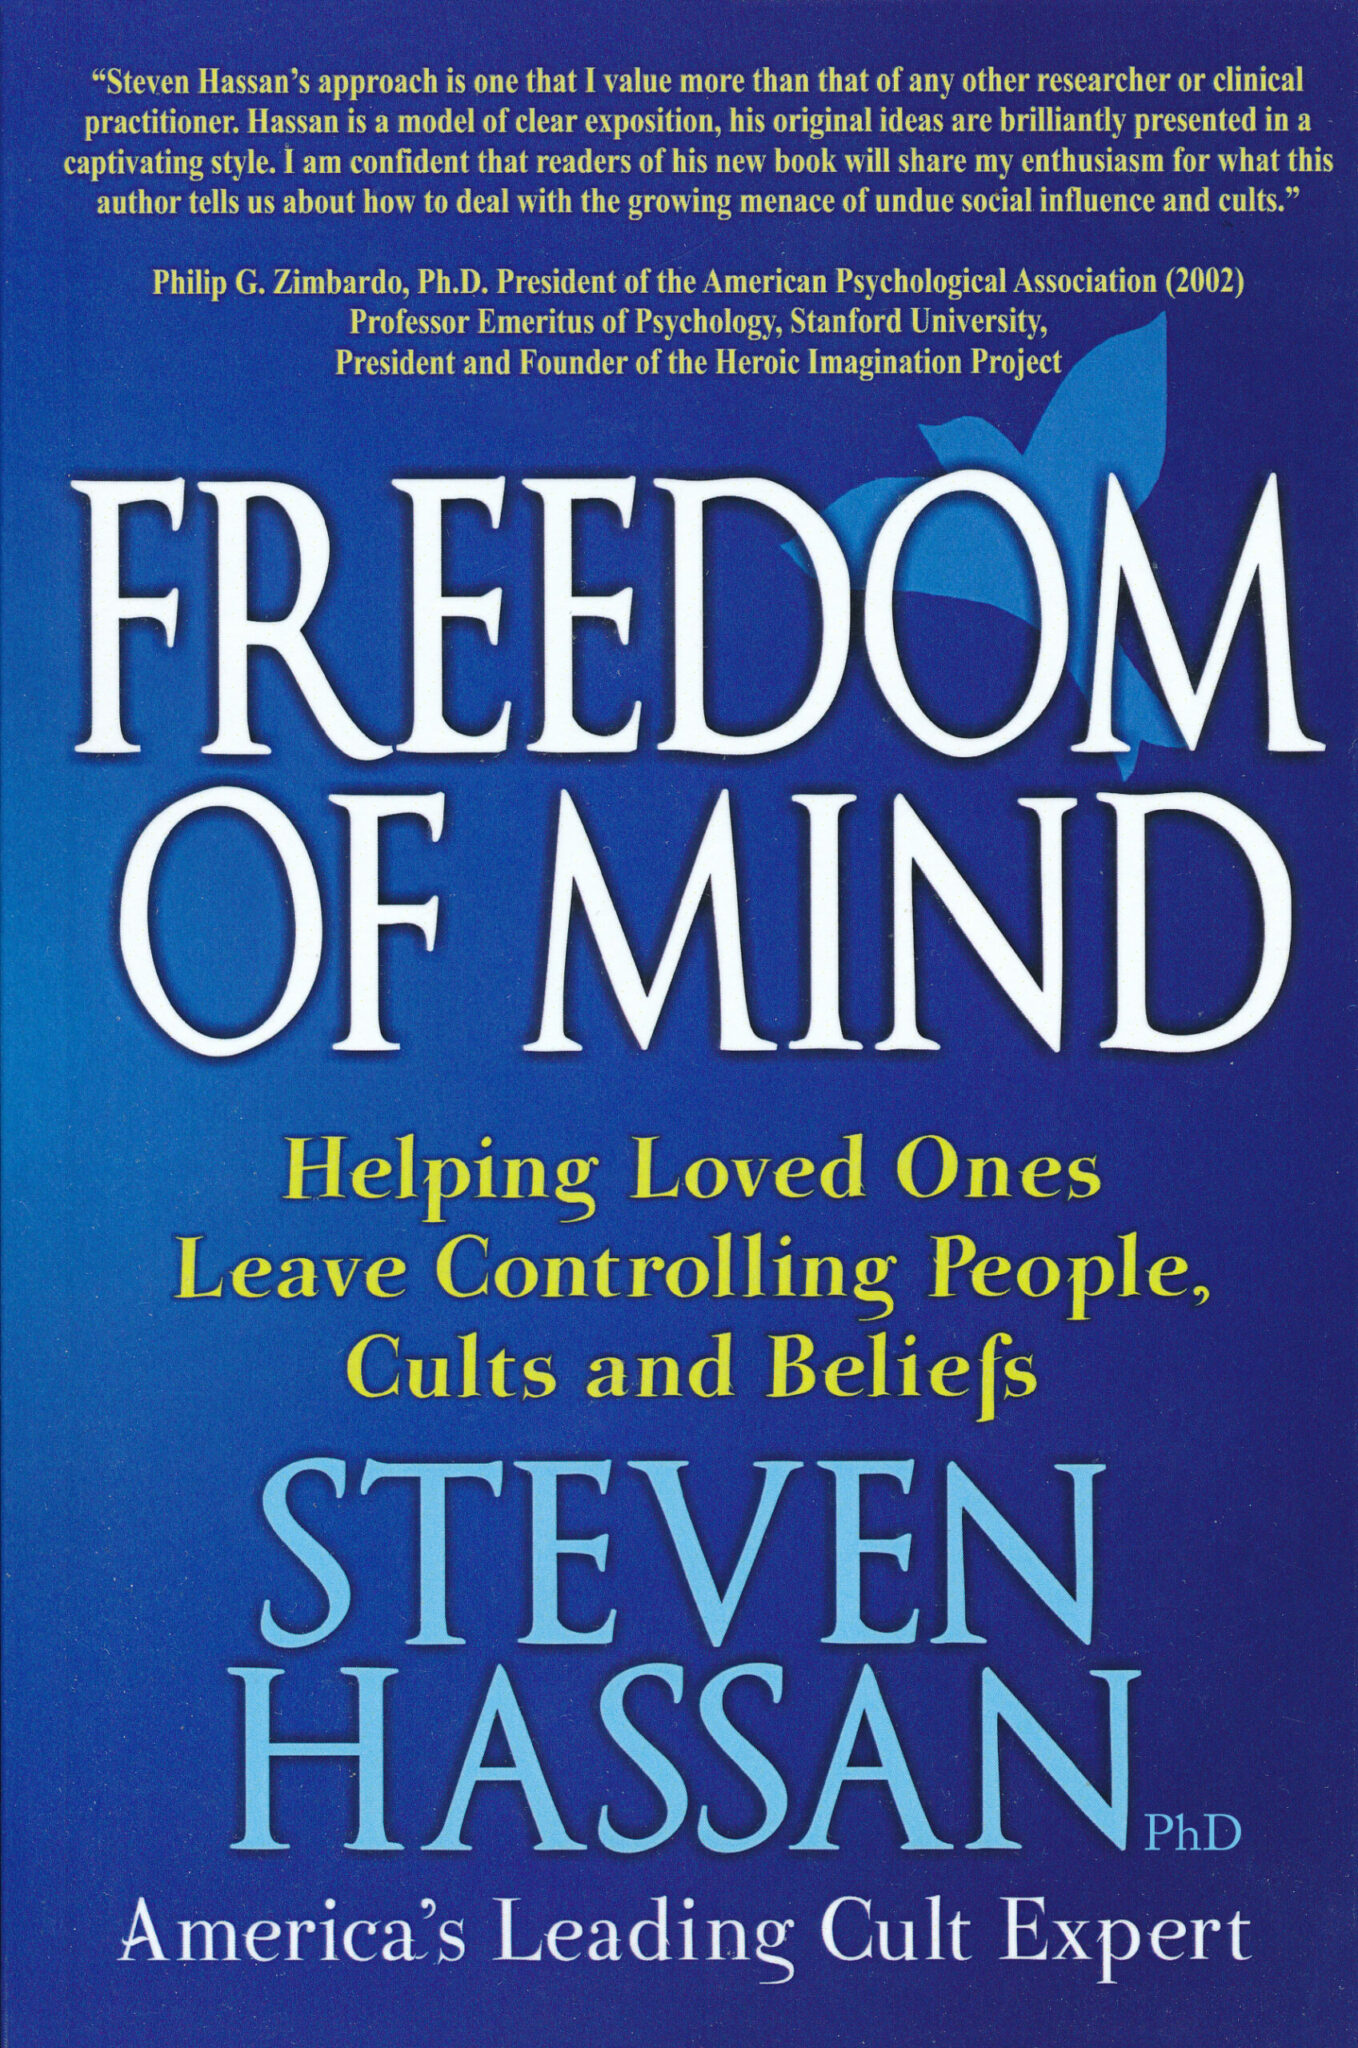 books by Dr. Steven Hassan - Freedom of Mind